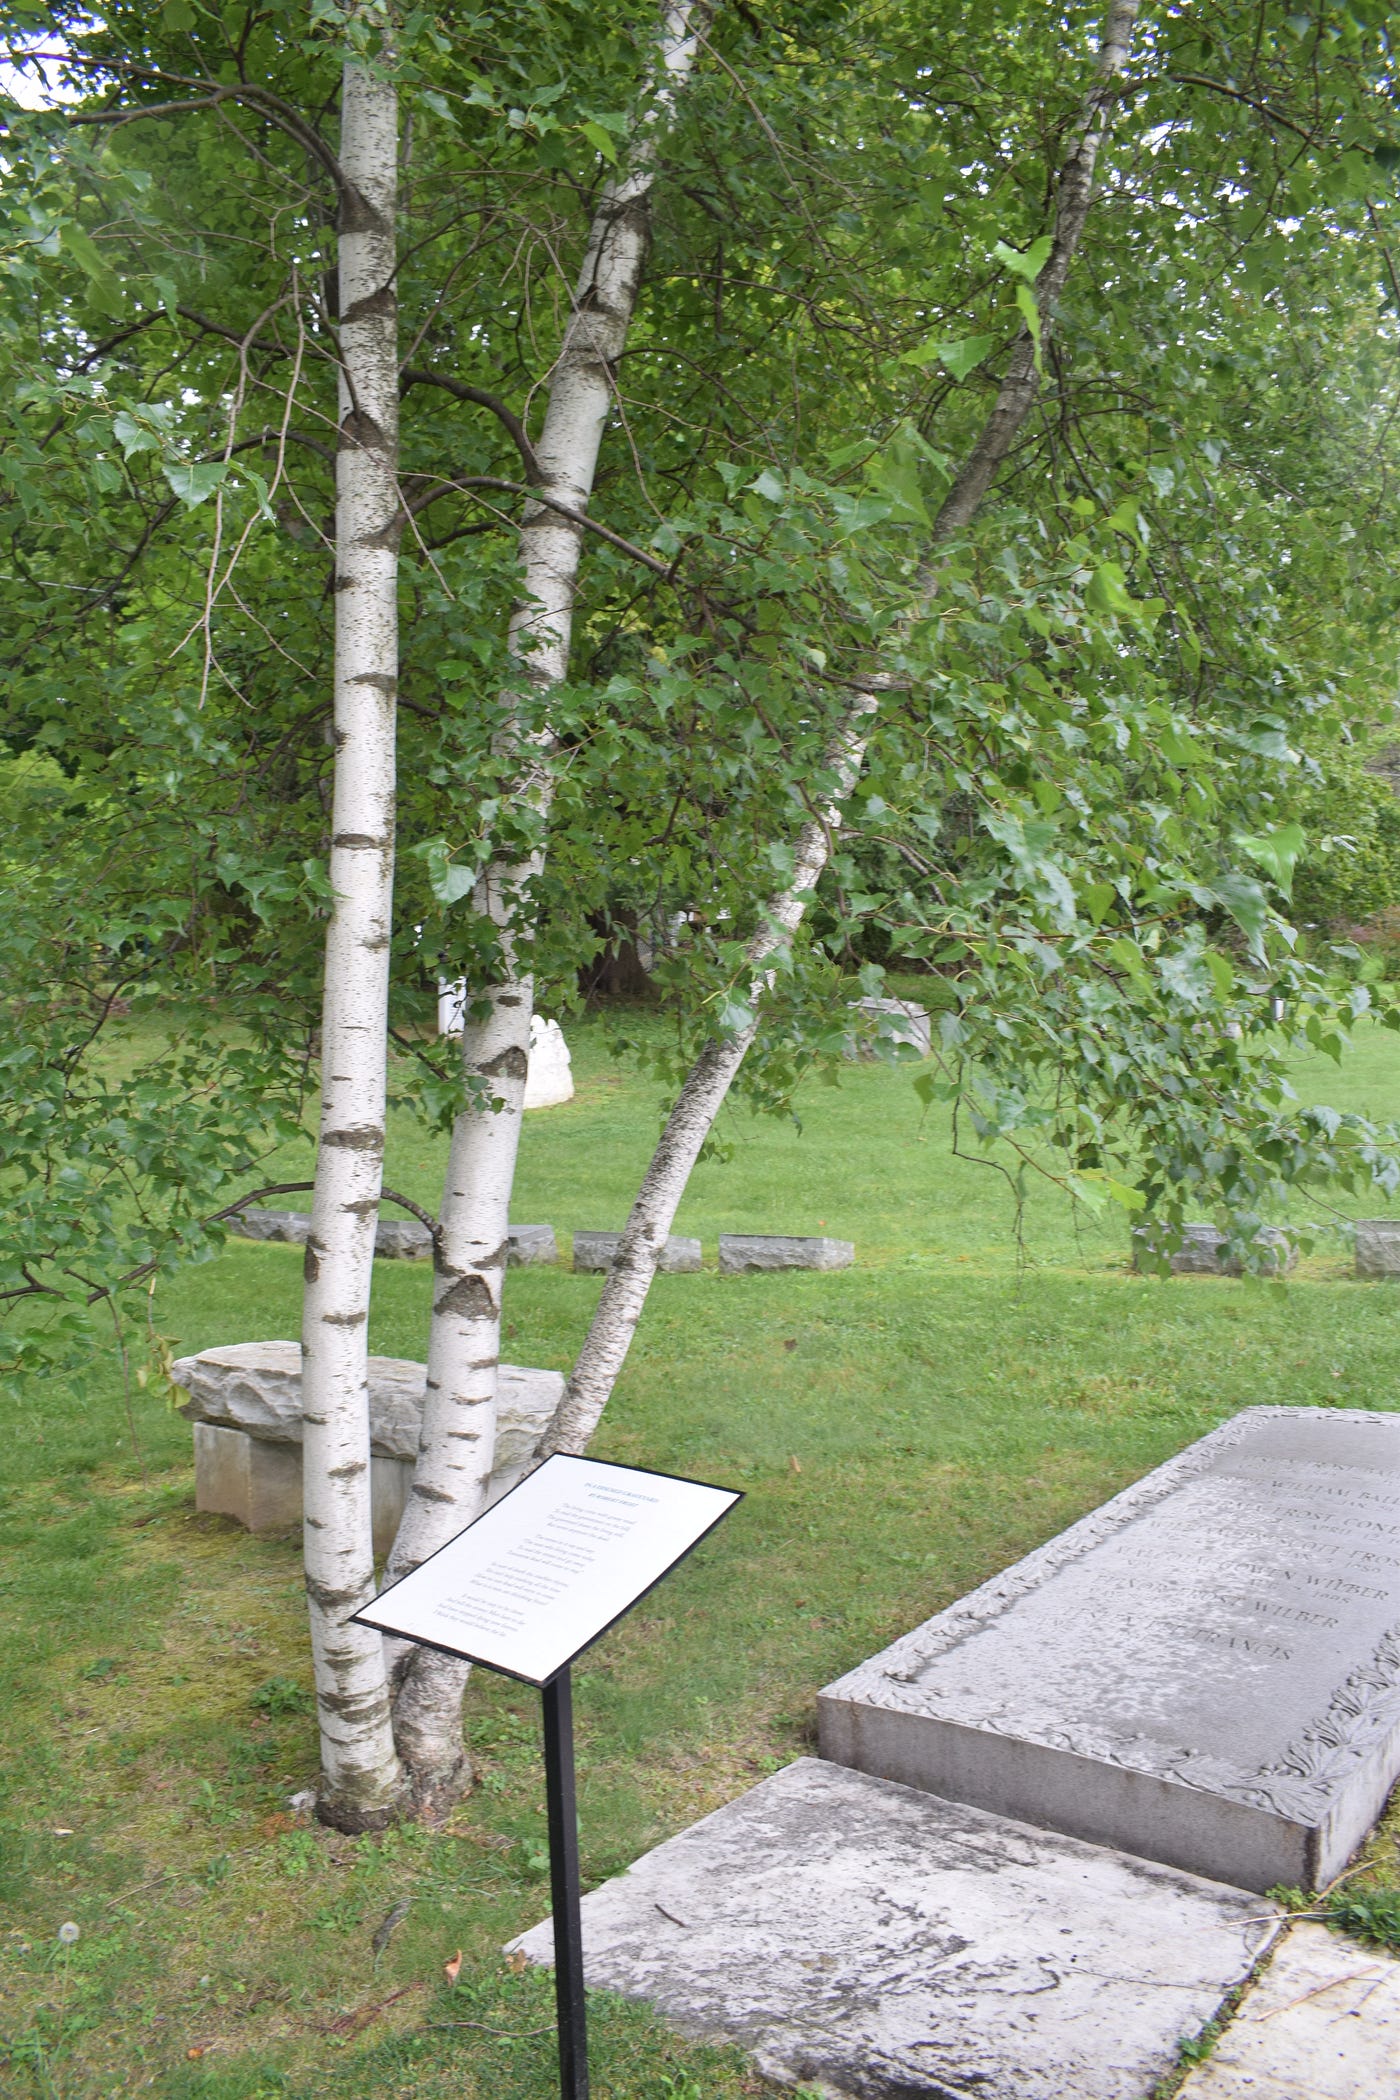 My Selection — “Birches”